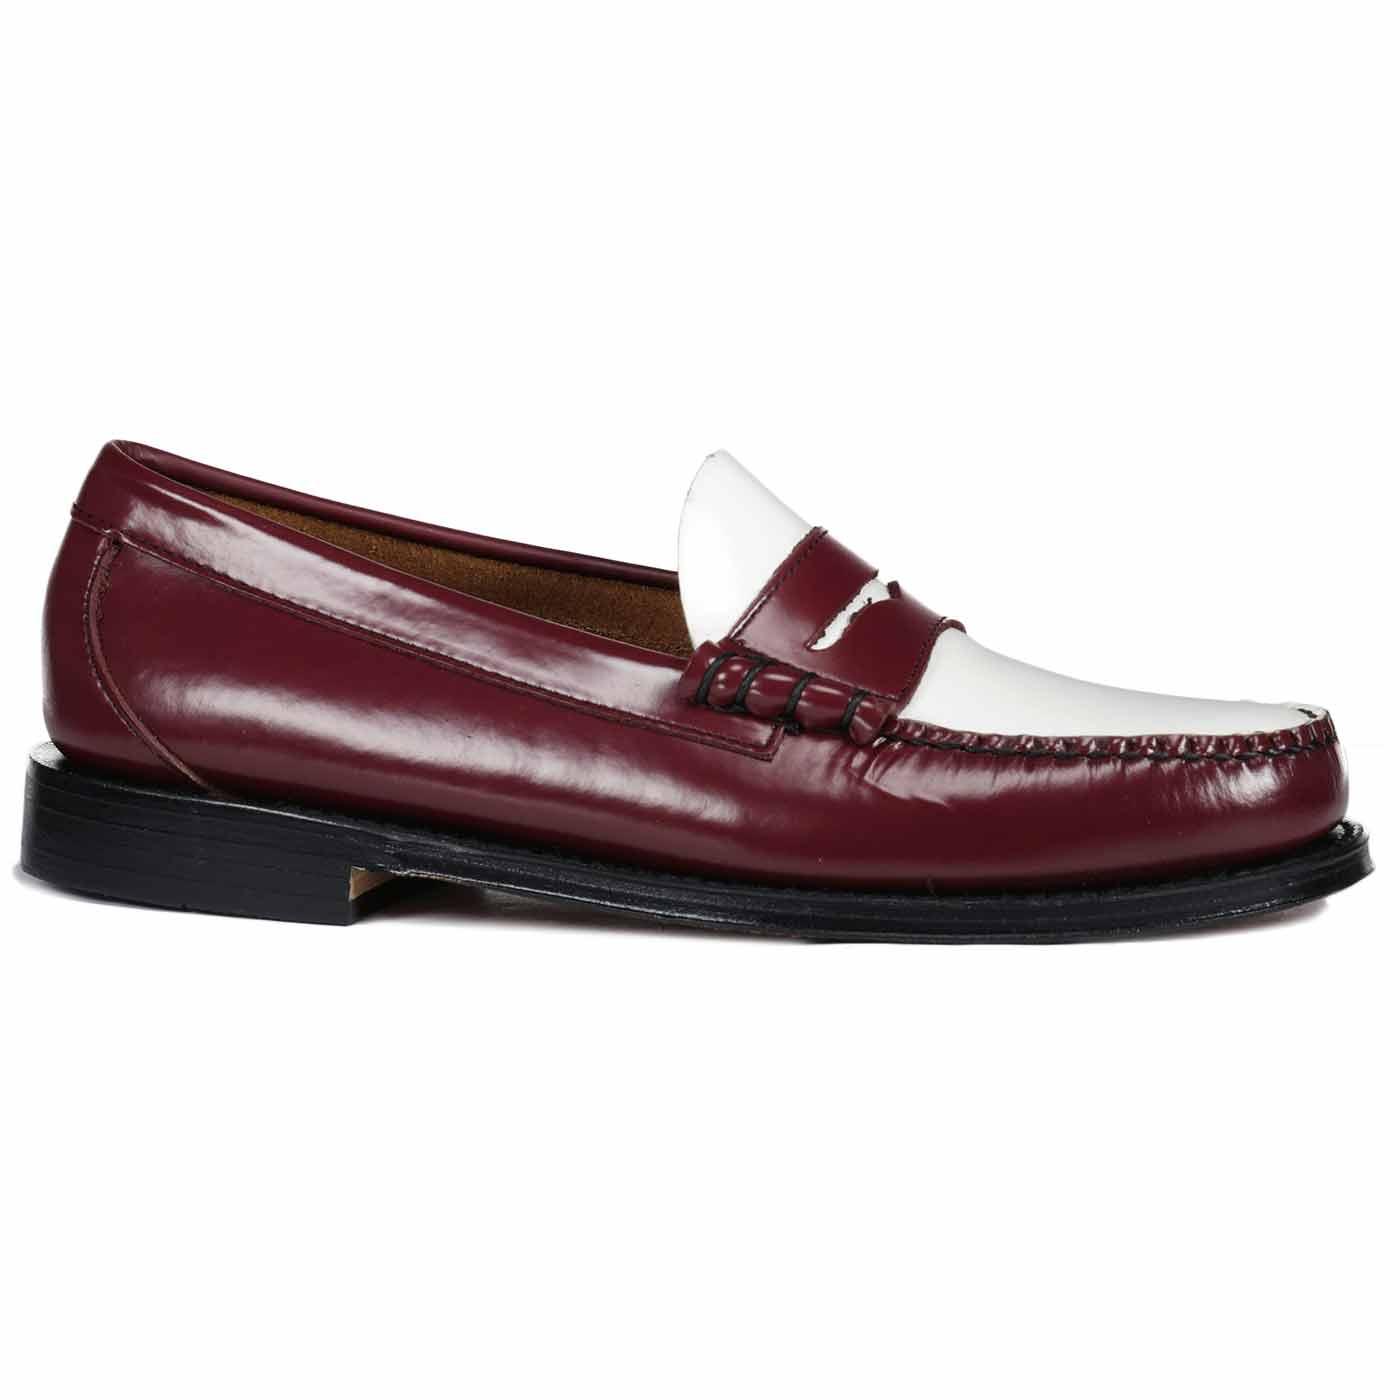 Larson BASS WEEJUNS Two Tone Mod Penny Loafers W/W